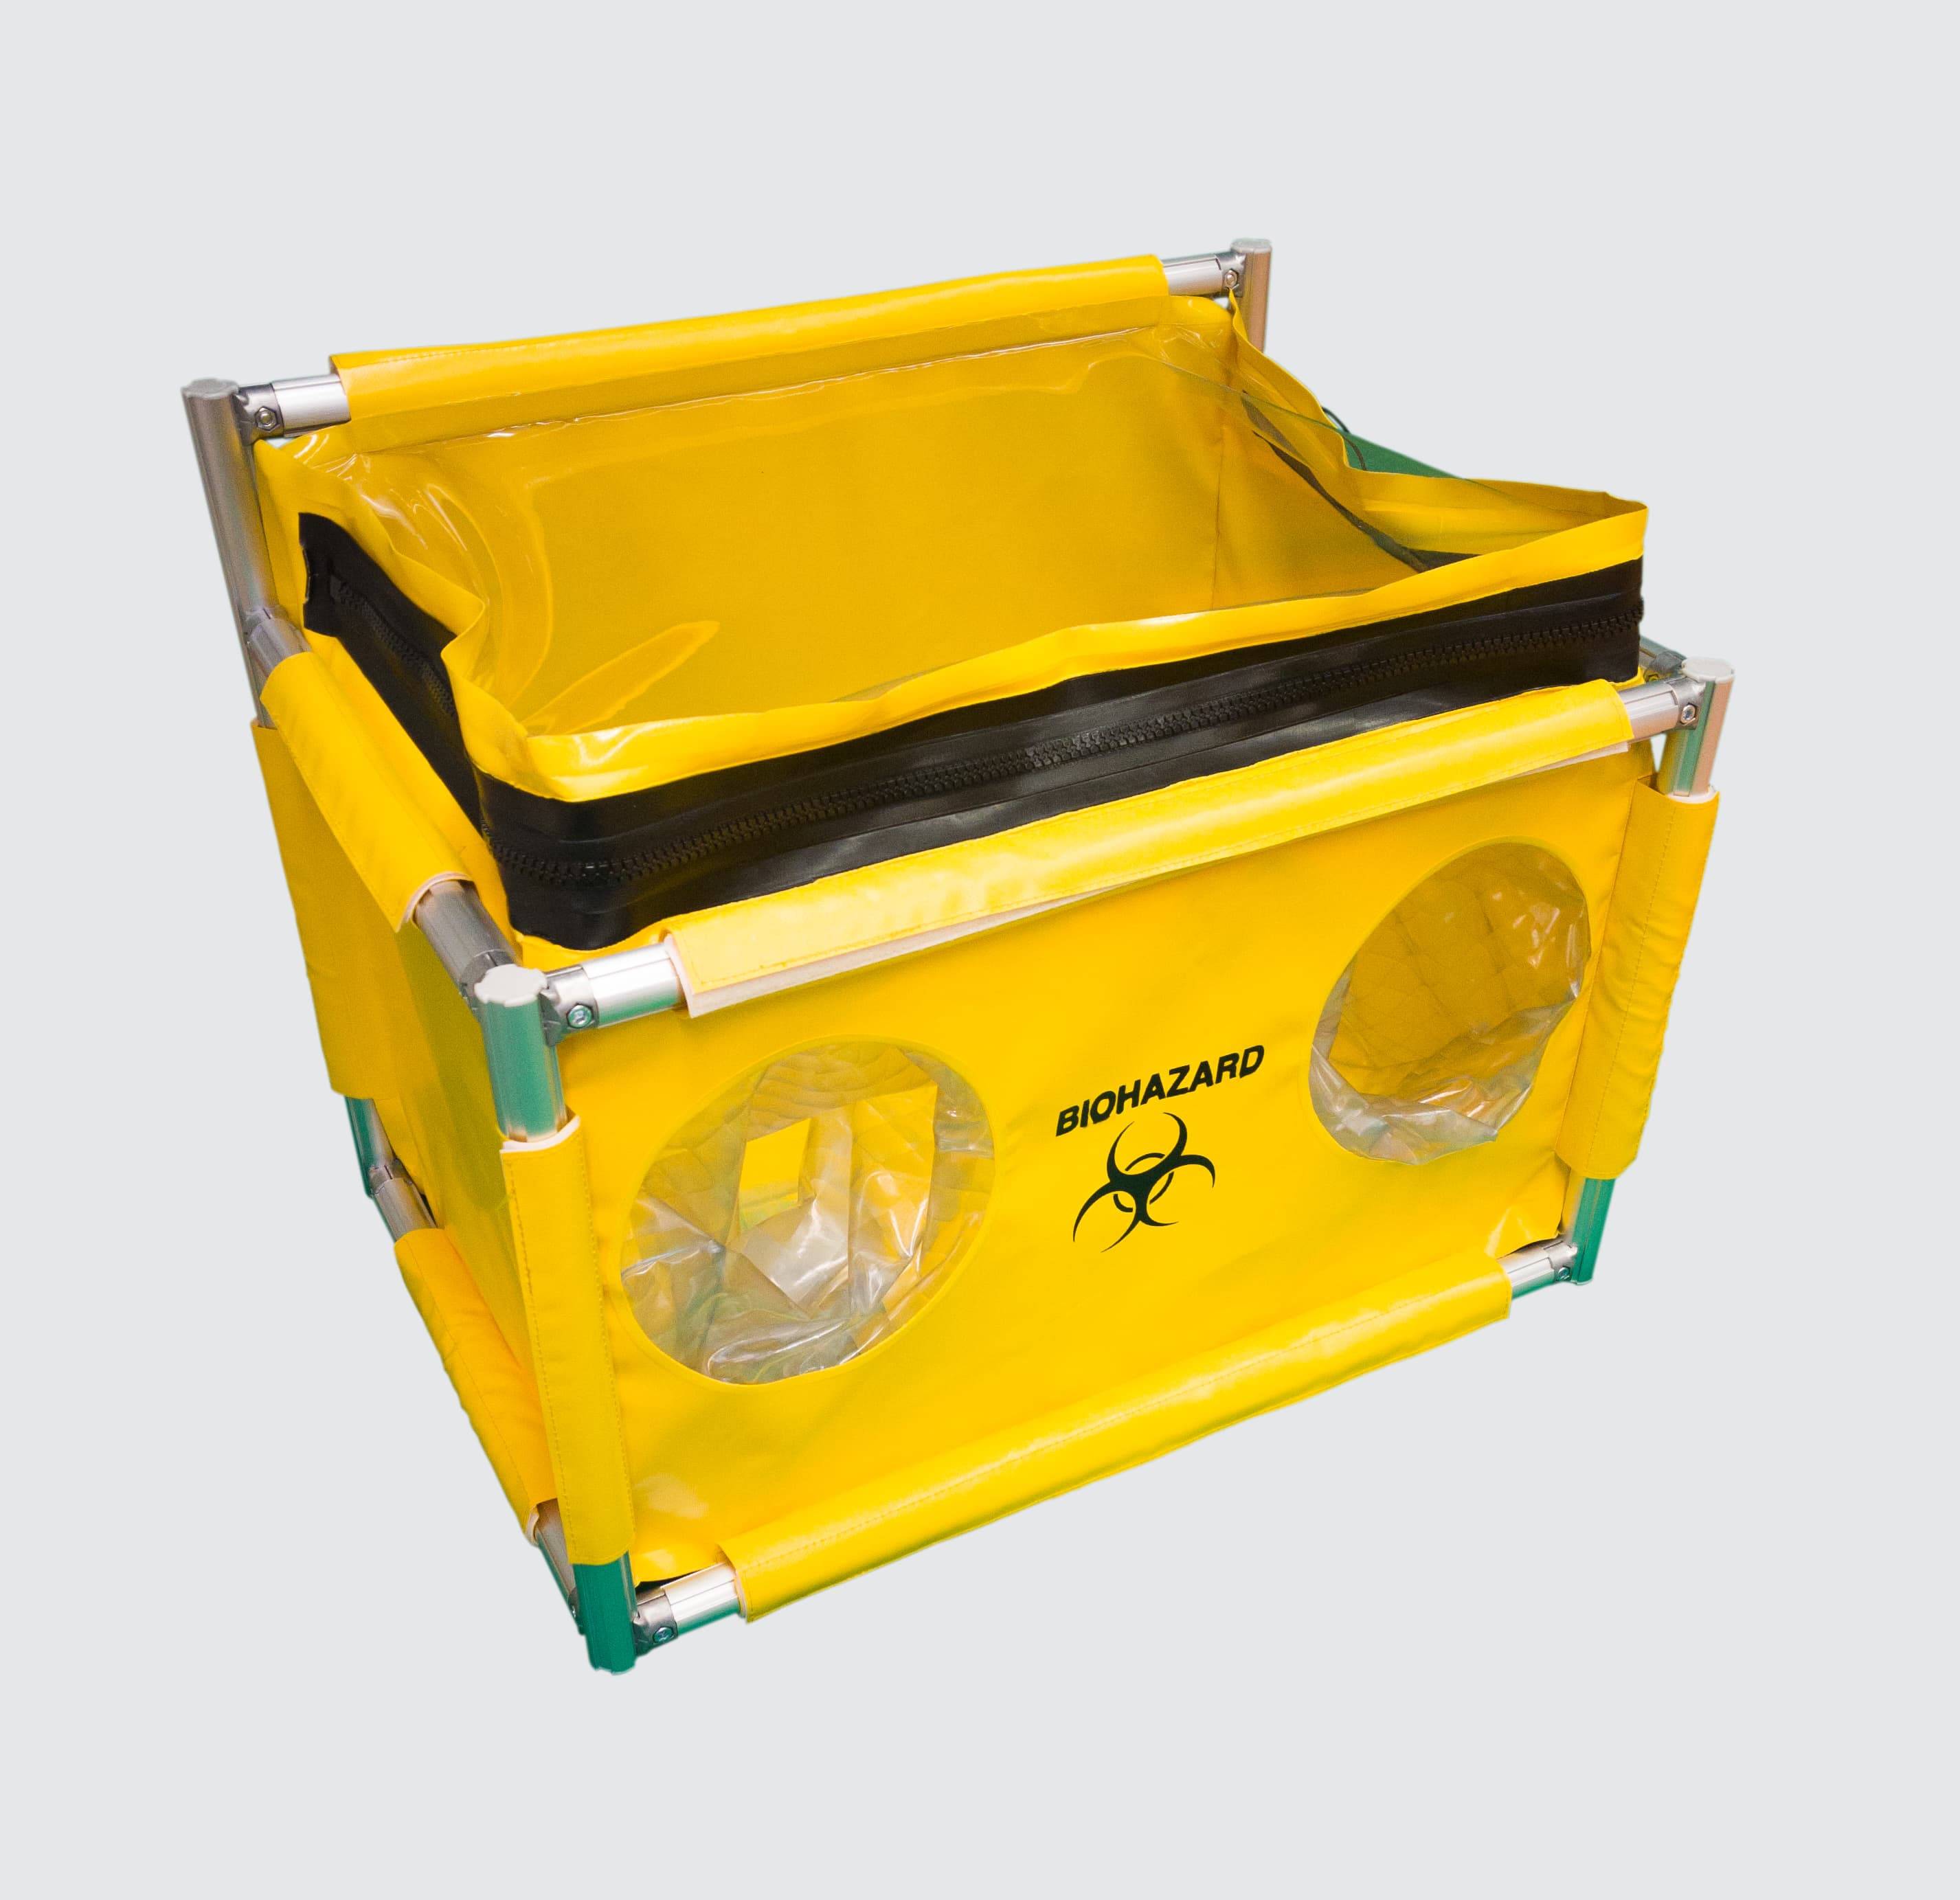 EB-10 Glovebox system for hazardous biological containment